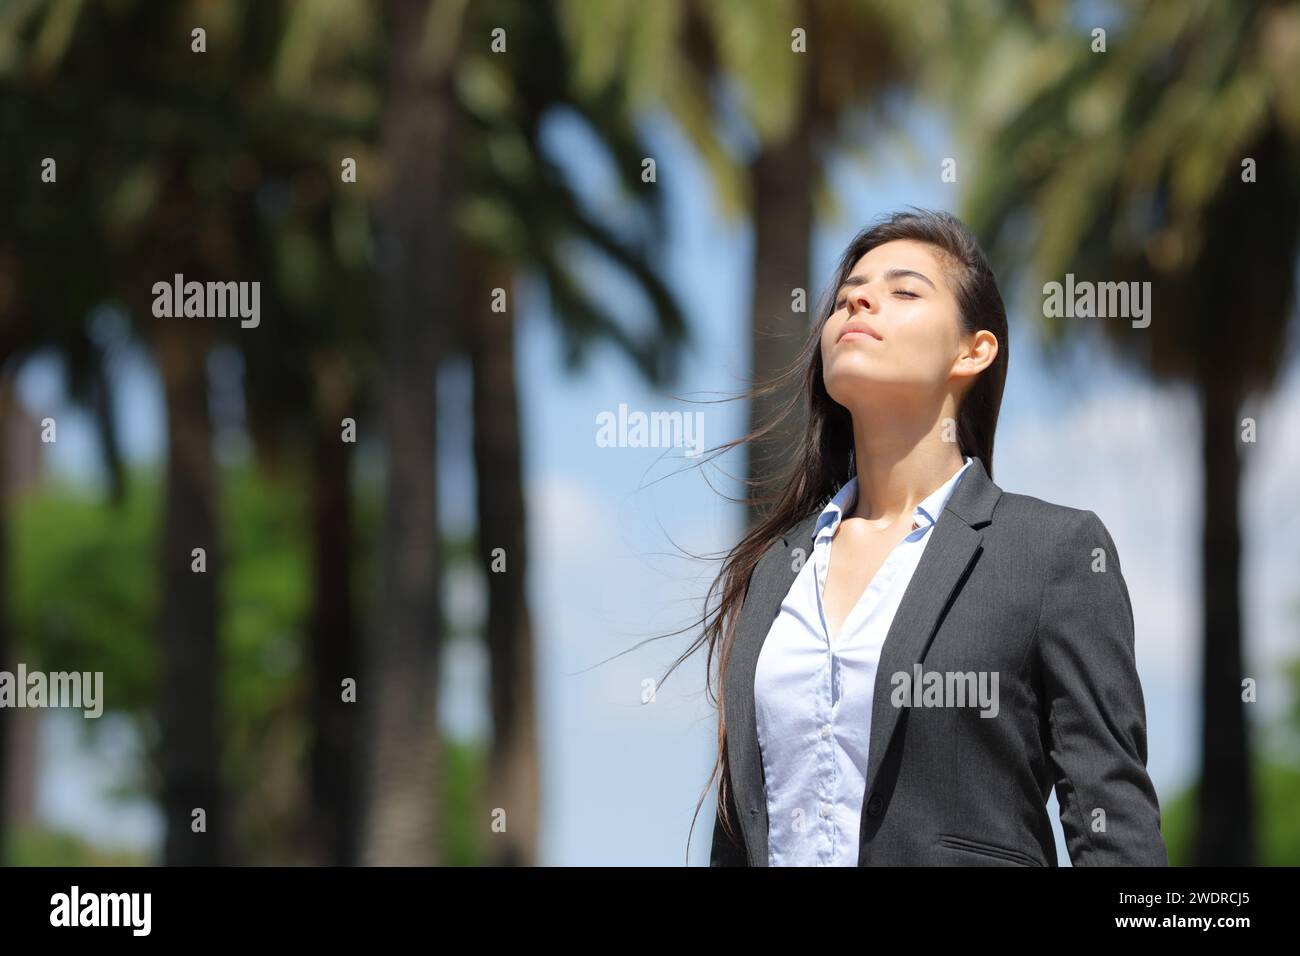 Businesswoman breathing fresh air standing in a park Stock Photo